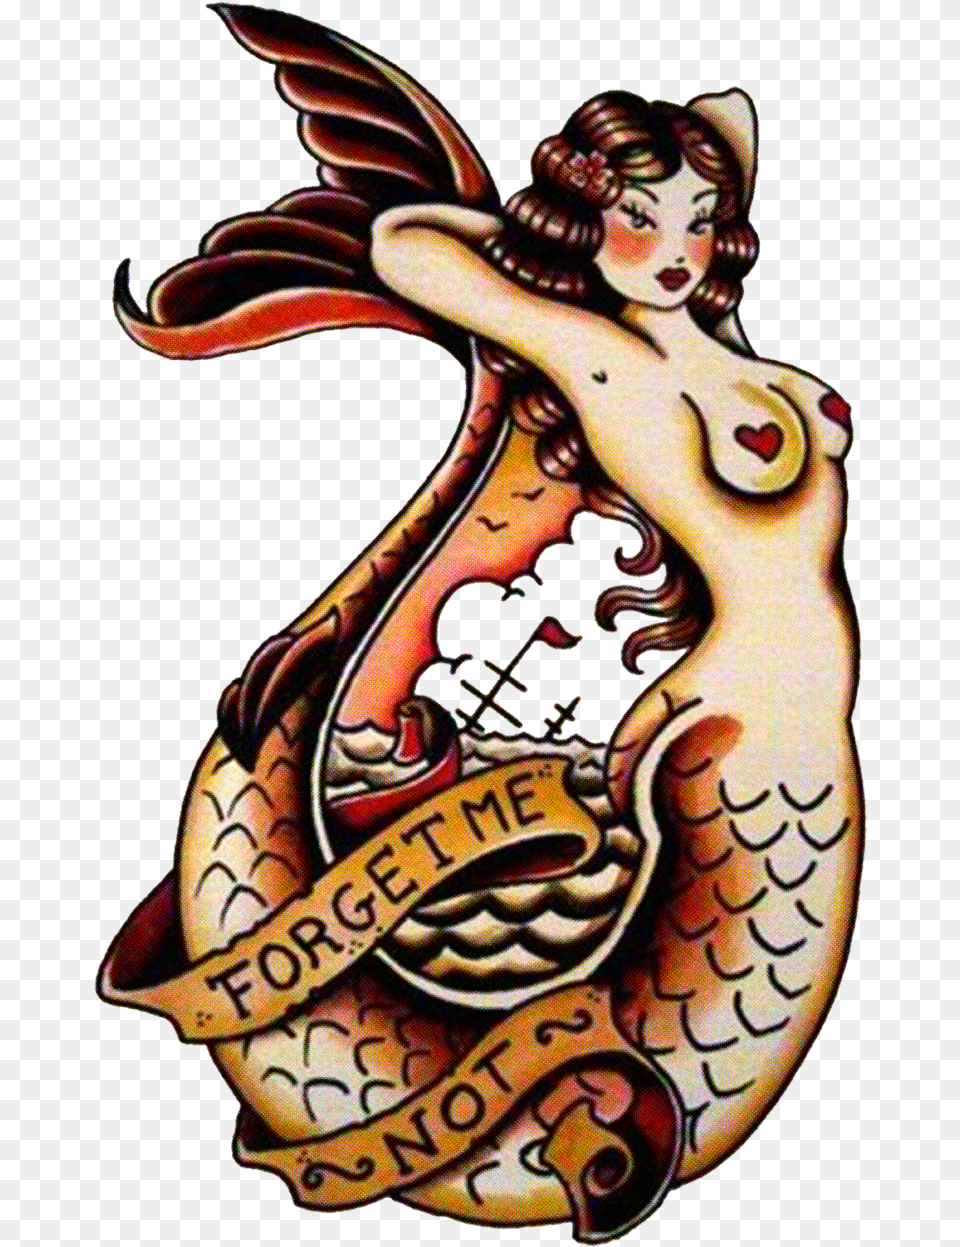 Sailor Jerry Tattoo Forget Me Not Mermaid Vulture Sailor Jerry Tattoos, Face, Head, Person, Adult Png Image